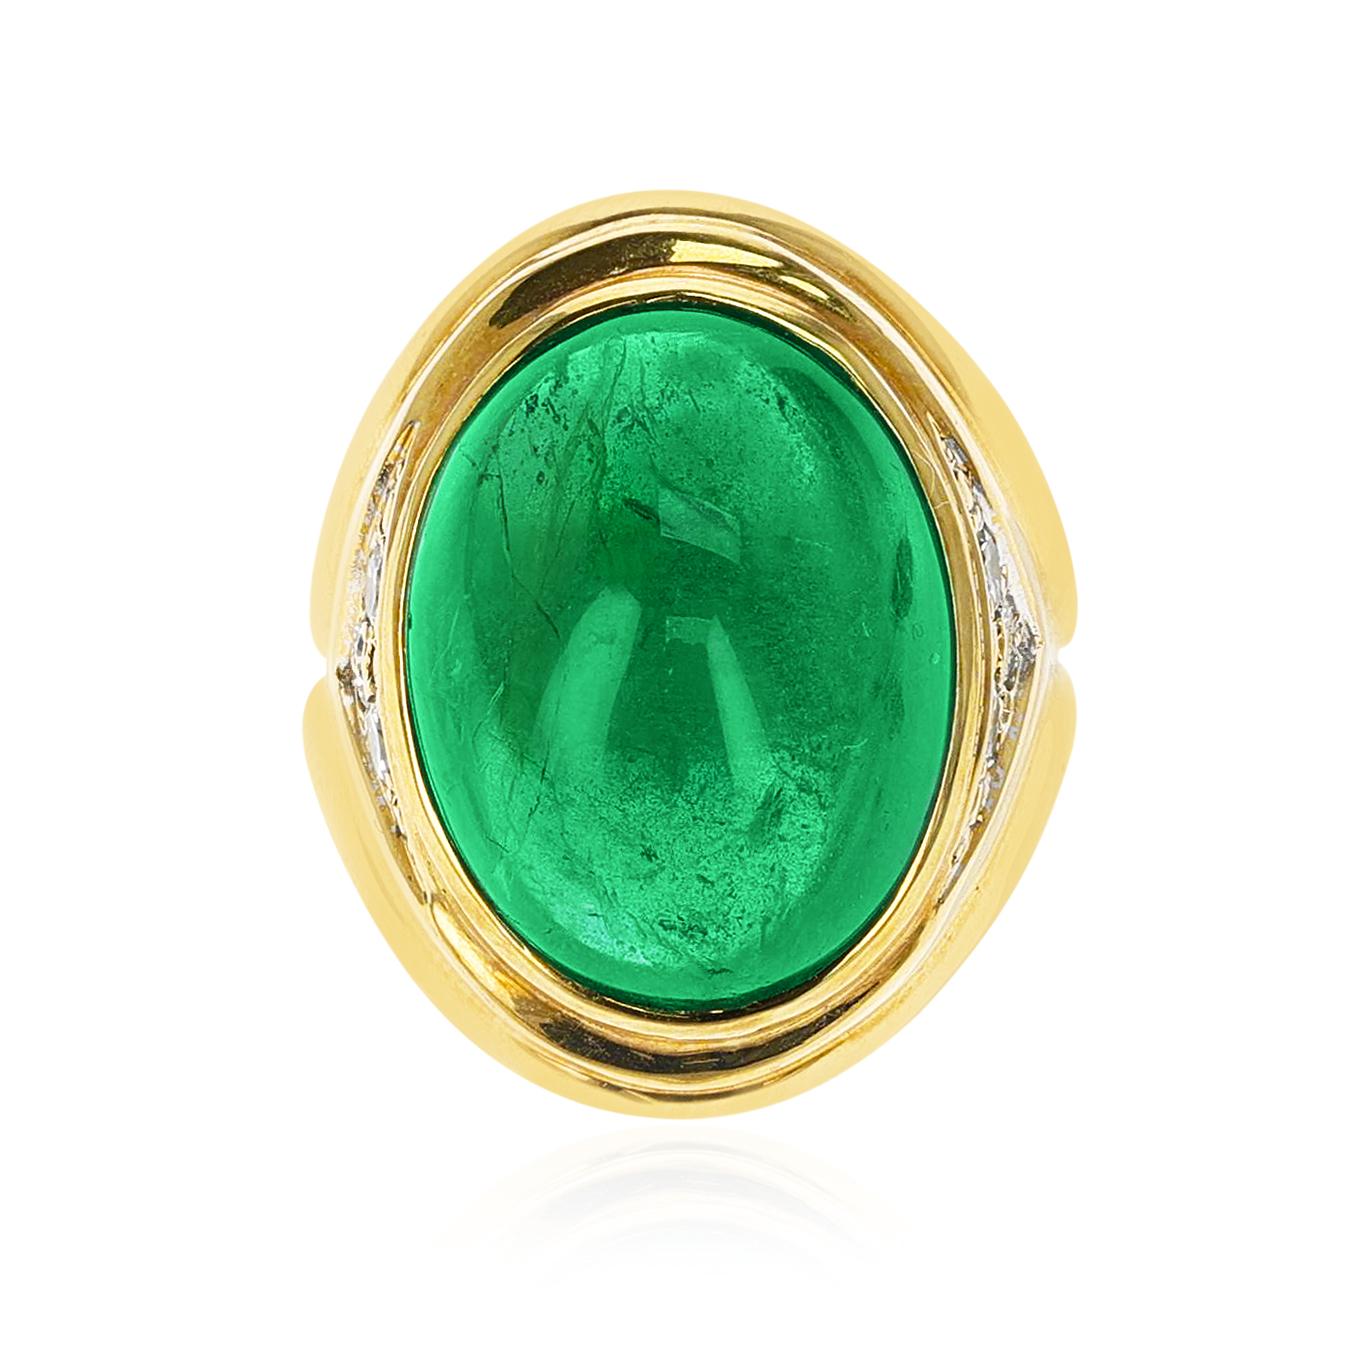 A 19.09 ct. Emerald Cabochon Ring with Diamonds made in 18 Karat Yellow Gold. The Diamonds weigh appx 0.40 carats. The total weight of the ring is 27.61 grams. The ring size is US 6. 